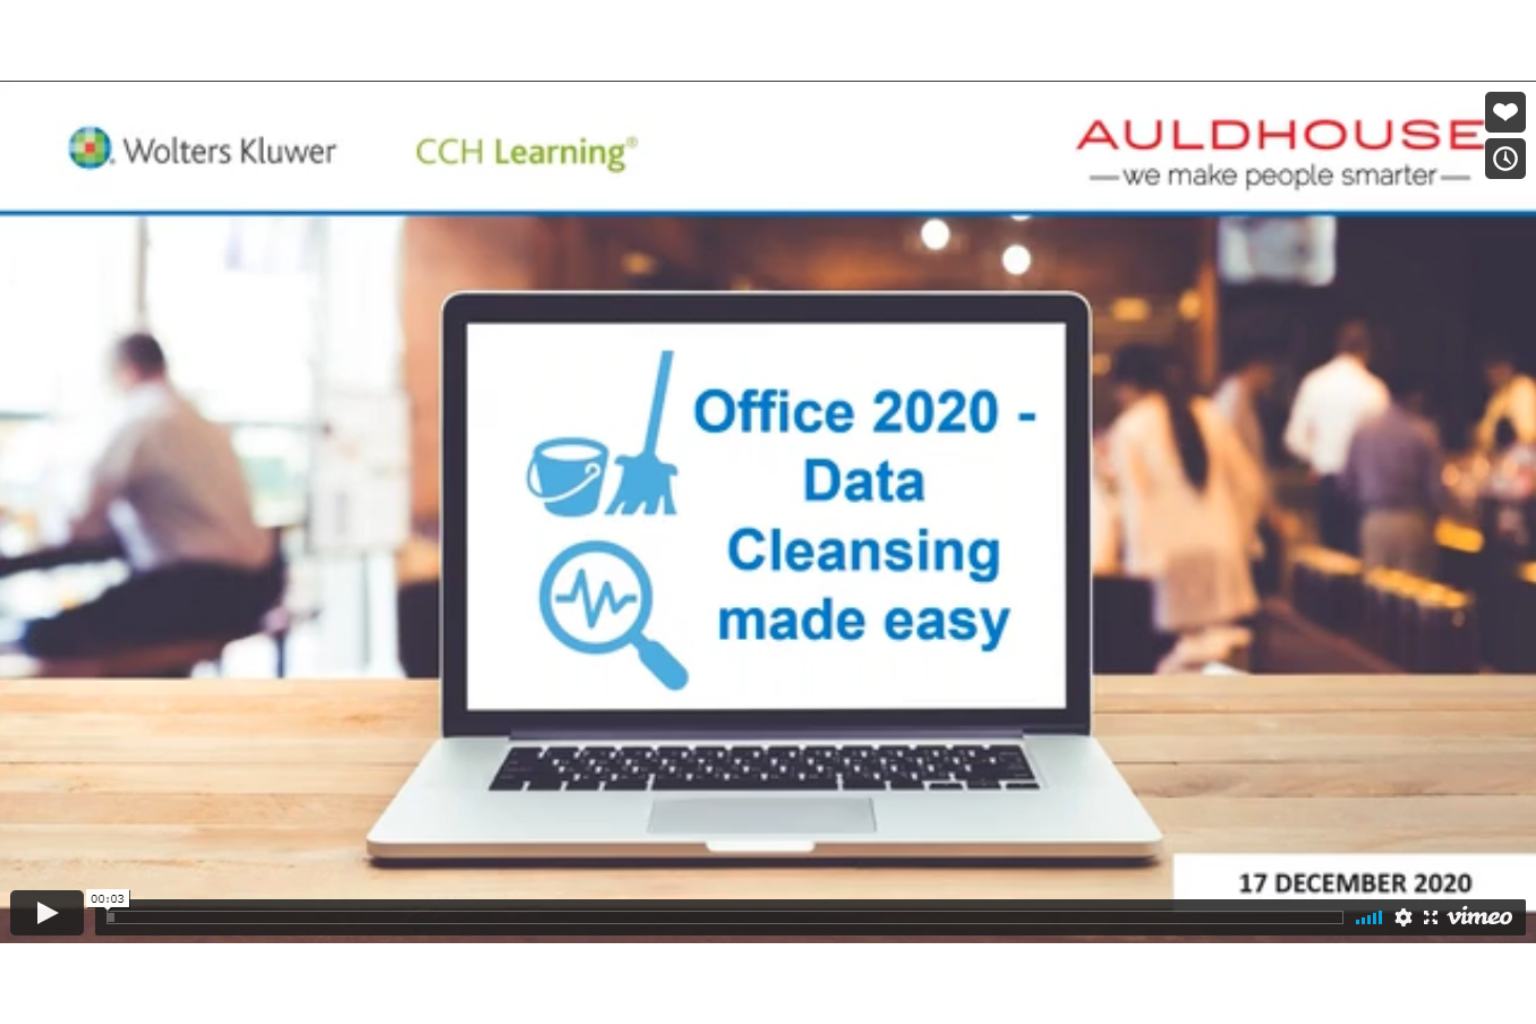 Office 2020 - Data Cleansing made easy